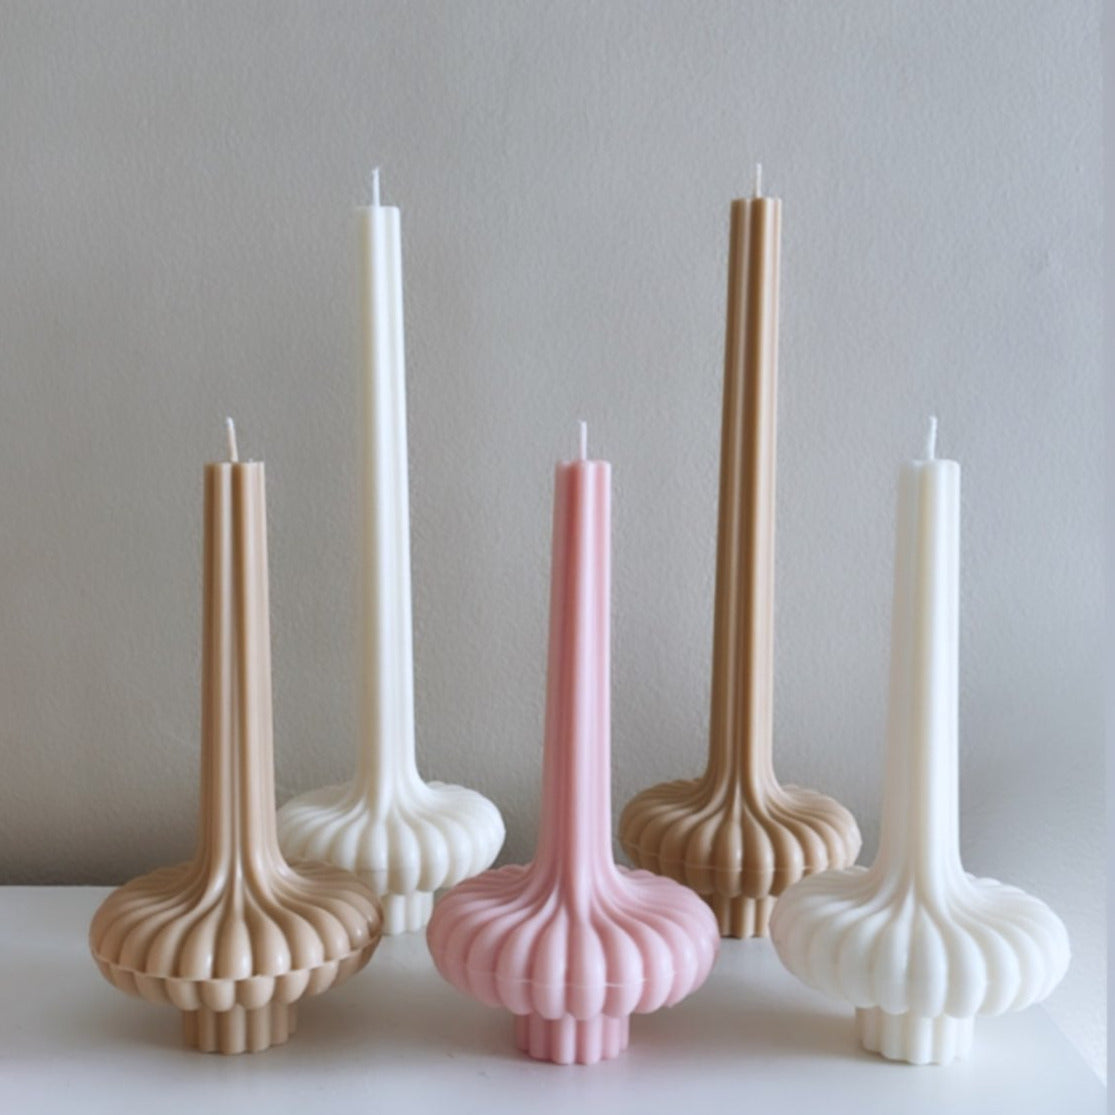 Acrylic Lamp Candle Moulds 2 - Silicone Mould, Mold for DIY Candles. Created using candle making kit with cotton candle wicks and candle colour chips. Using soy wax for pillar candles. Sold by Myka Candles Moulds Australia